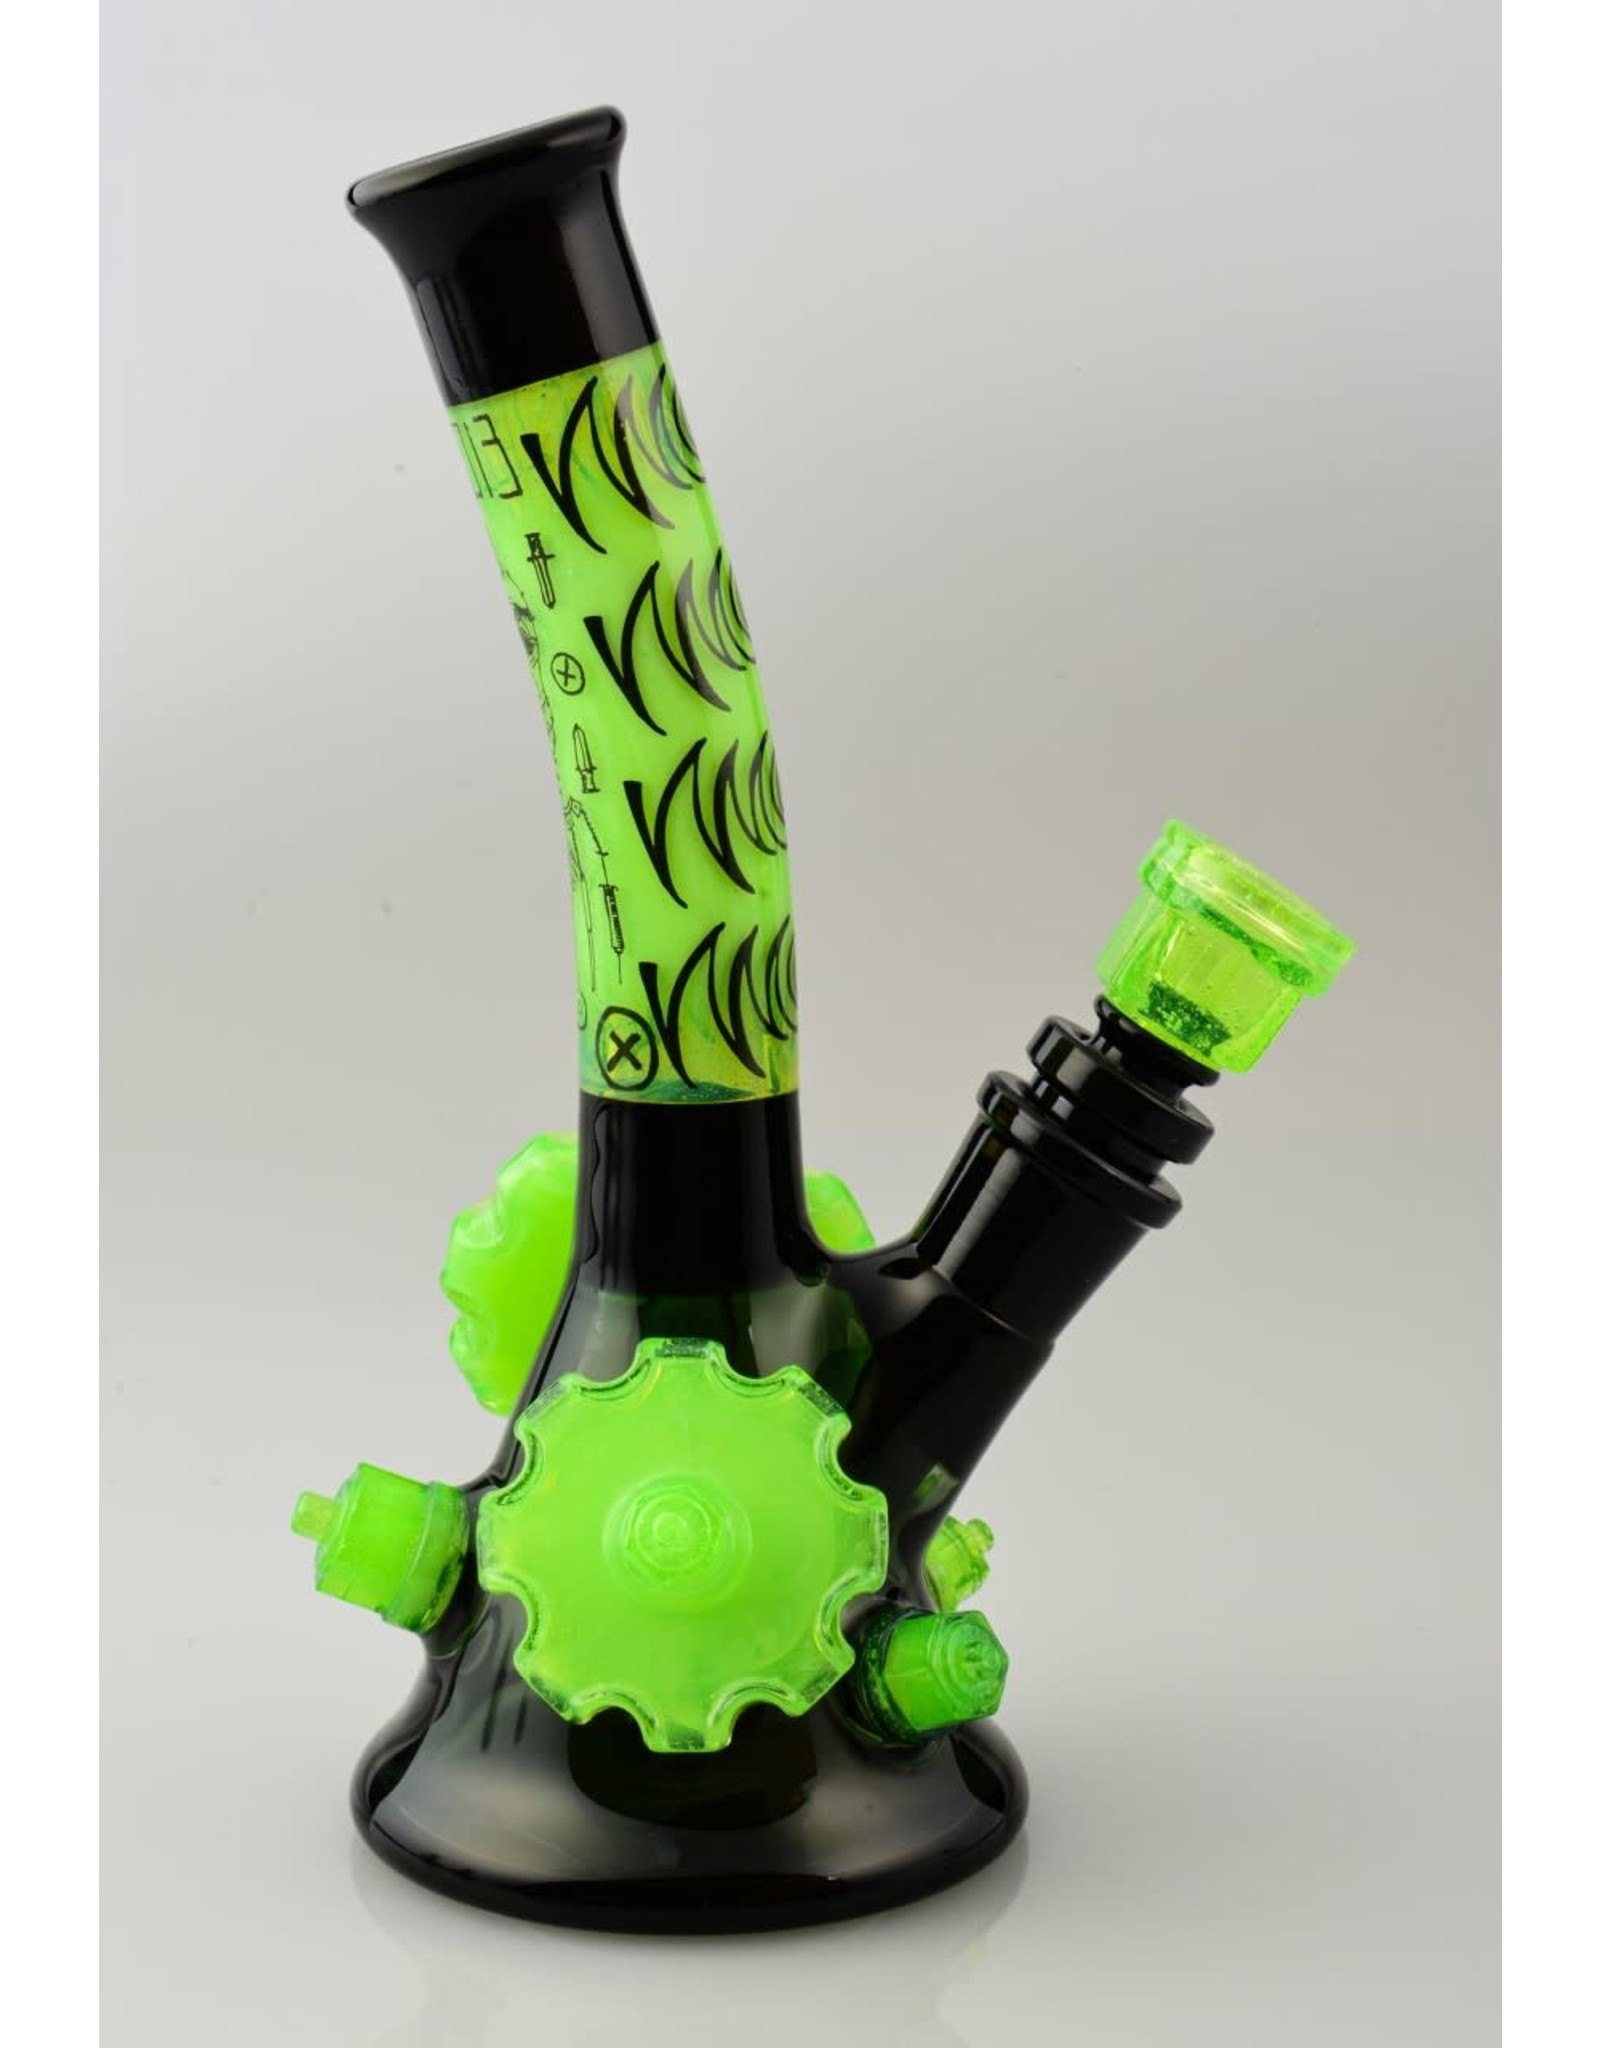 Zach P And Ouchkick Studios Zach P Slime And Black Sketch and Gear Beaker